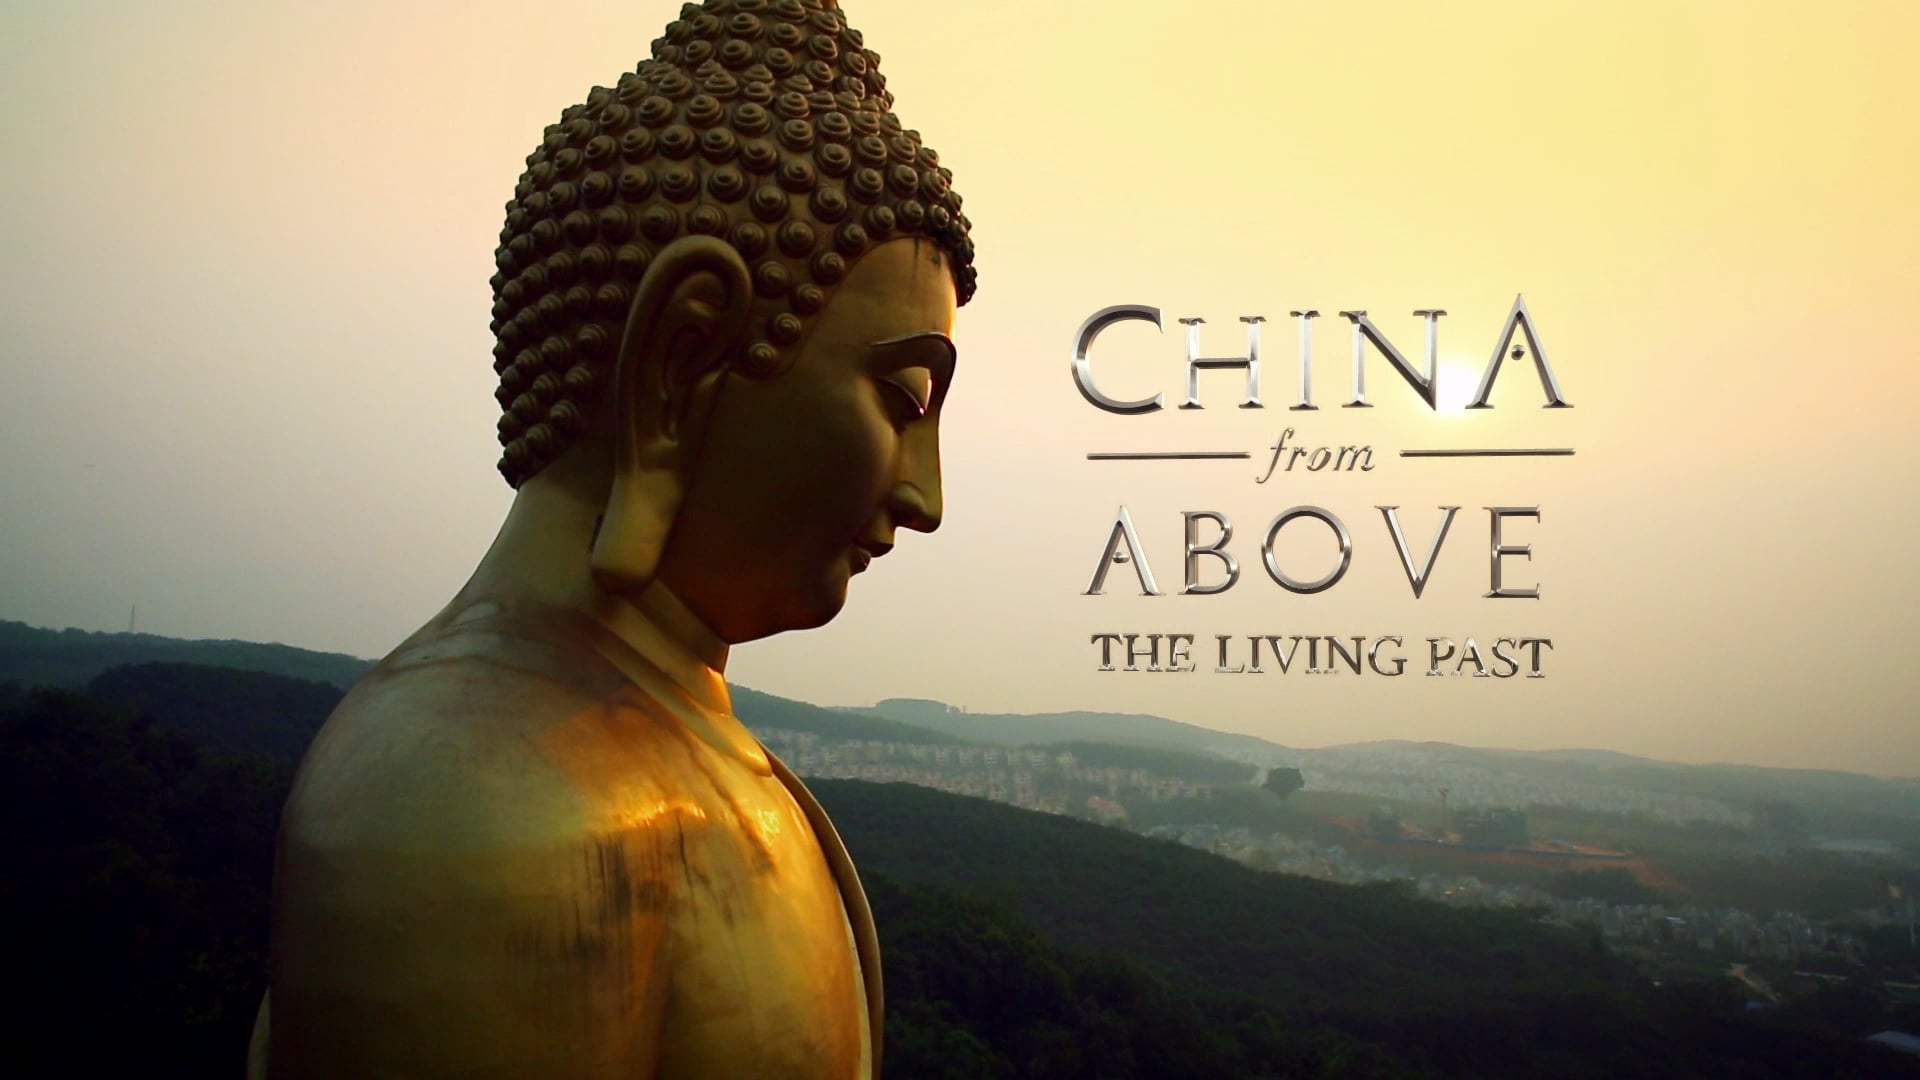 China From Above: The Living Past (Pretitle)